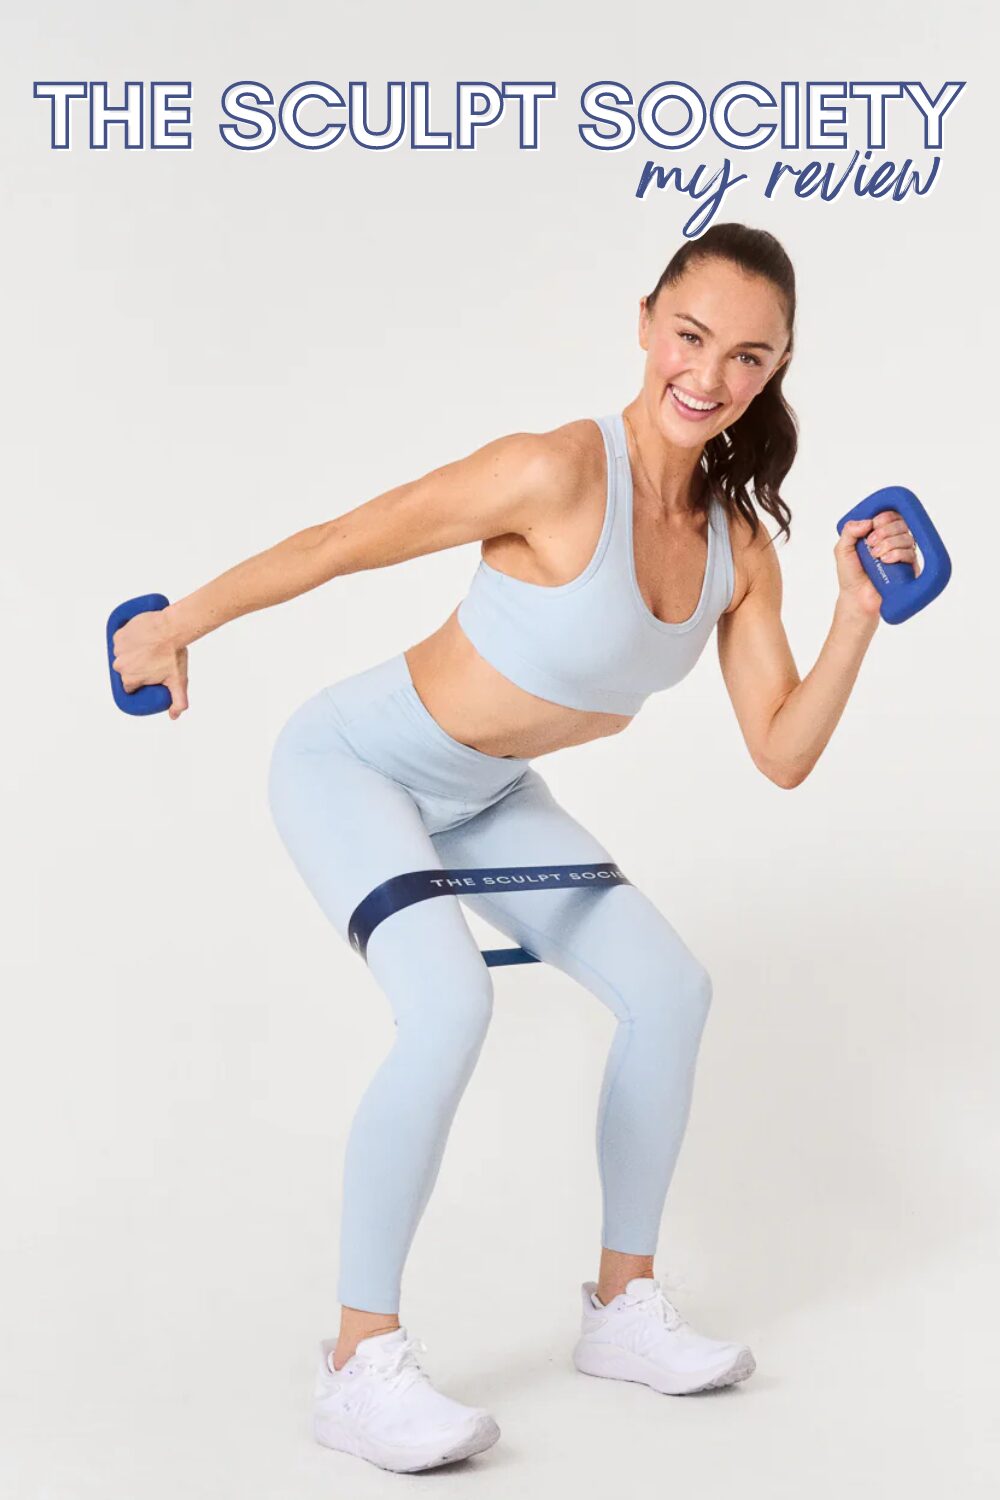 Les Mills Shapes with medium sculpt band - game changer